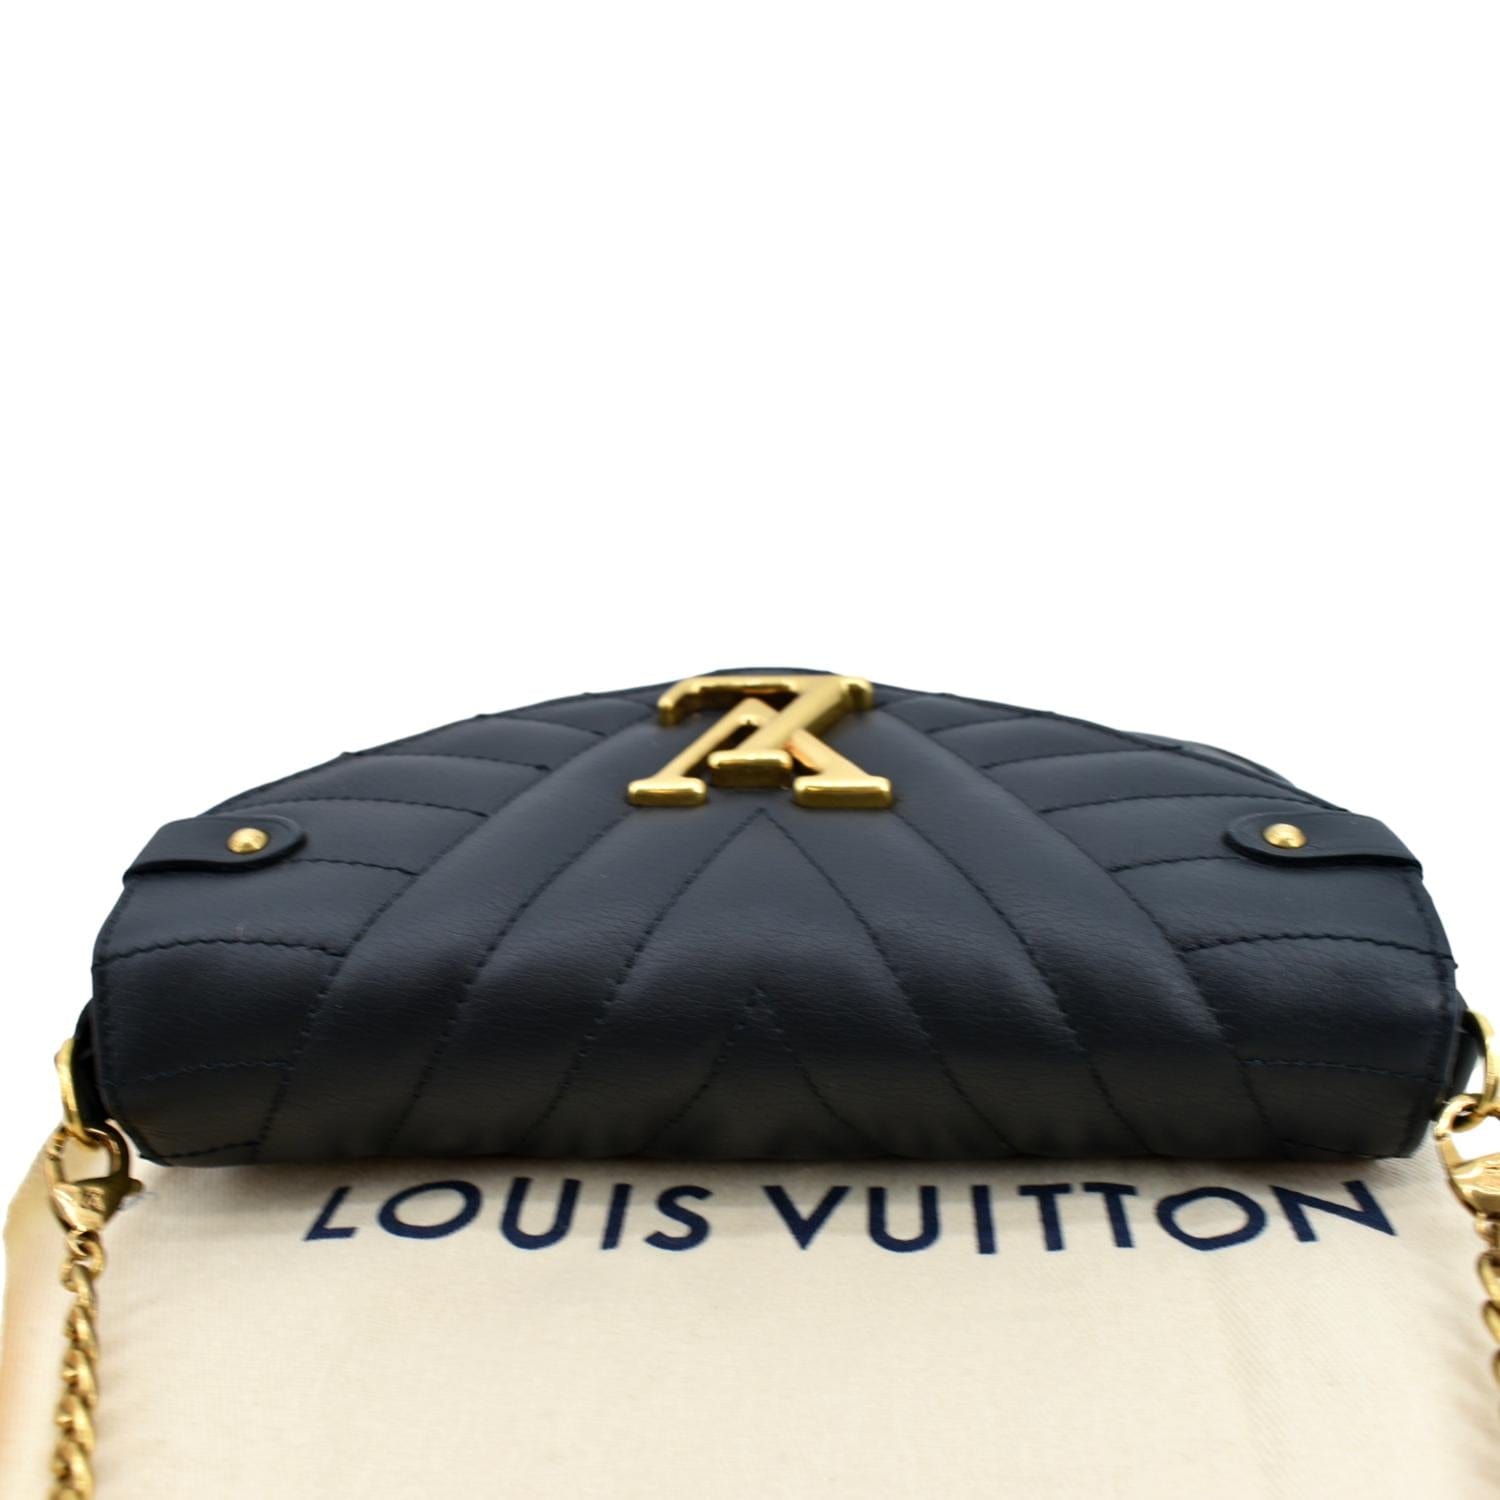 Louis Vuitton - New Wave Heart Bag- 100% Authentic - Light use for